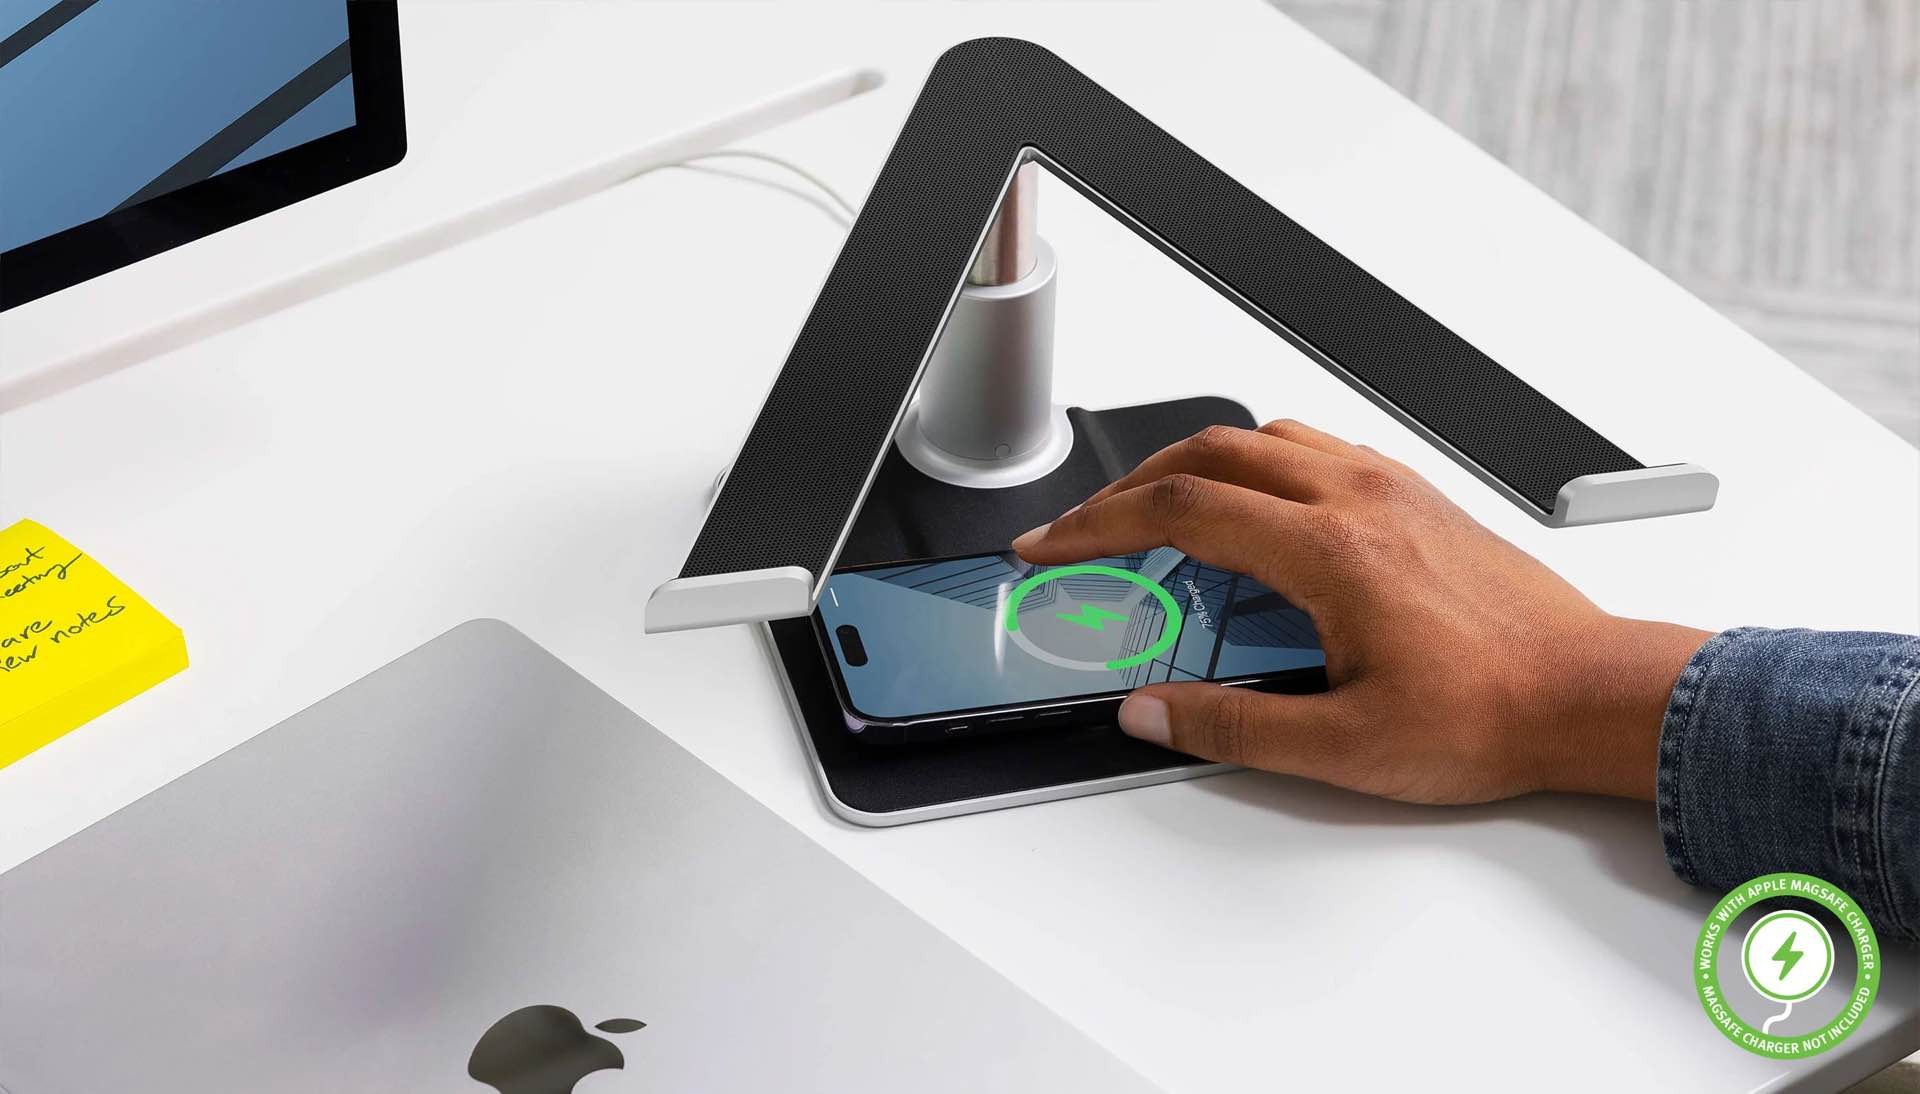 twelve-south-hirise-pro-macbook-stand-magsafe-charger-base